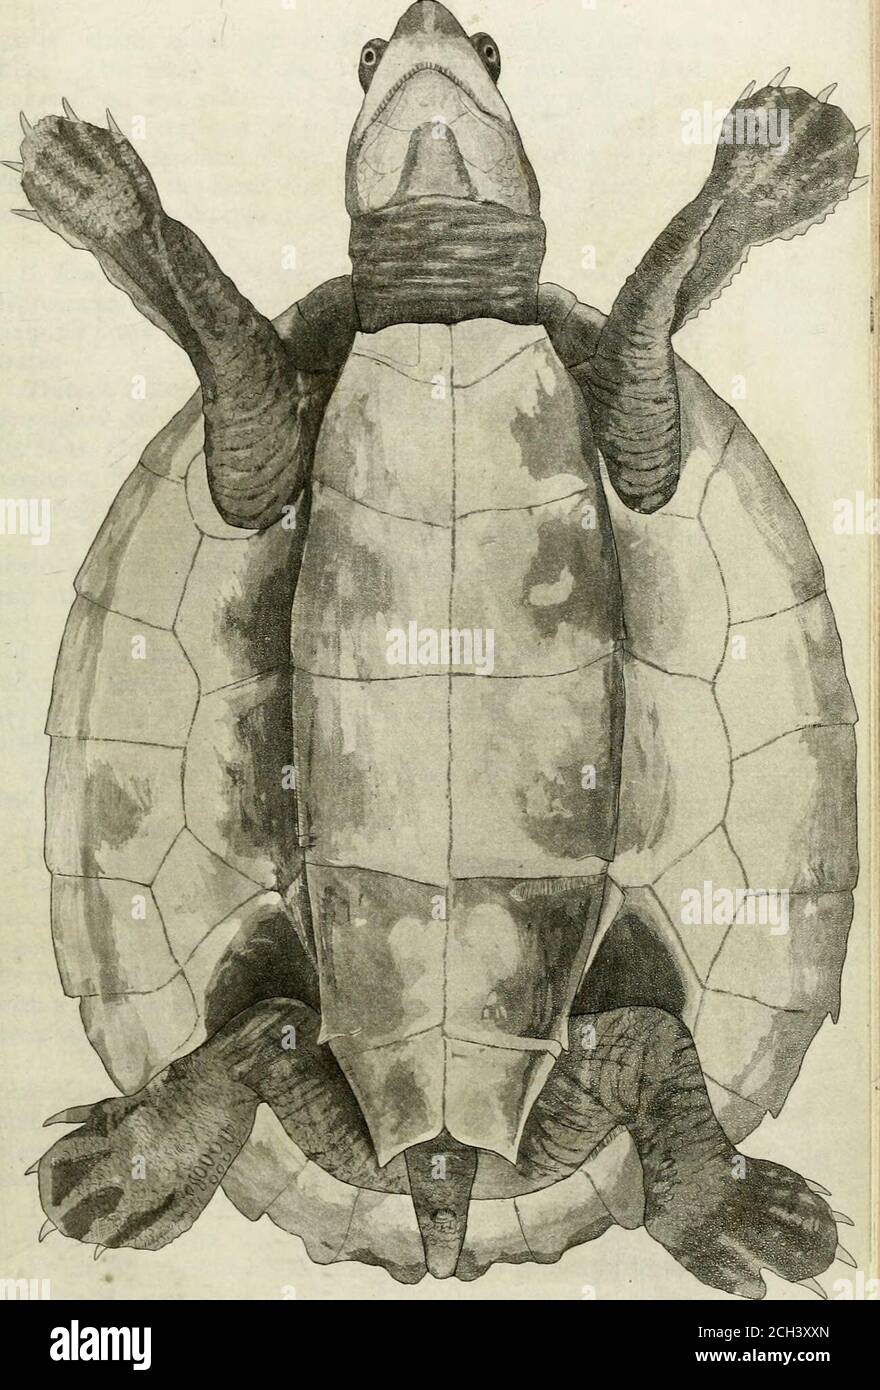 . Synopsis reptilium : or short descriptions of the species of reptiles. Part I., Cataphracta. Tortoises, crocodiles, and enaliosaurians . EMYS. 21 one of which, given me by Mr. Bell, I kept alive for sometime. The margin of the shell is much expanded, andrecurved on the sides, and sharply but simply toothed be-hind. The sternum is pale blackish speckled, and theshields finely blackish rayed, rounded and crenated in front.The keel and the large size of the areola of the specimenswould doubtless disappear as the animal grew older. 3. Emys Spengleri, [Spenglers Terrapin.)—Testaoblongadepressa pa Stock Photo